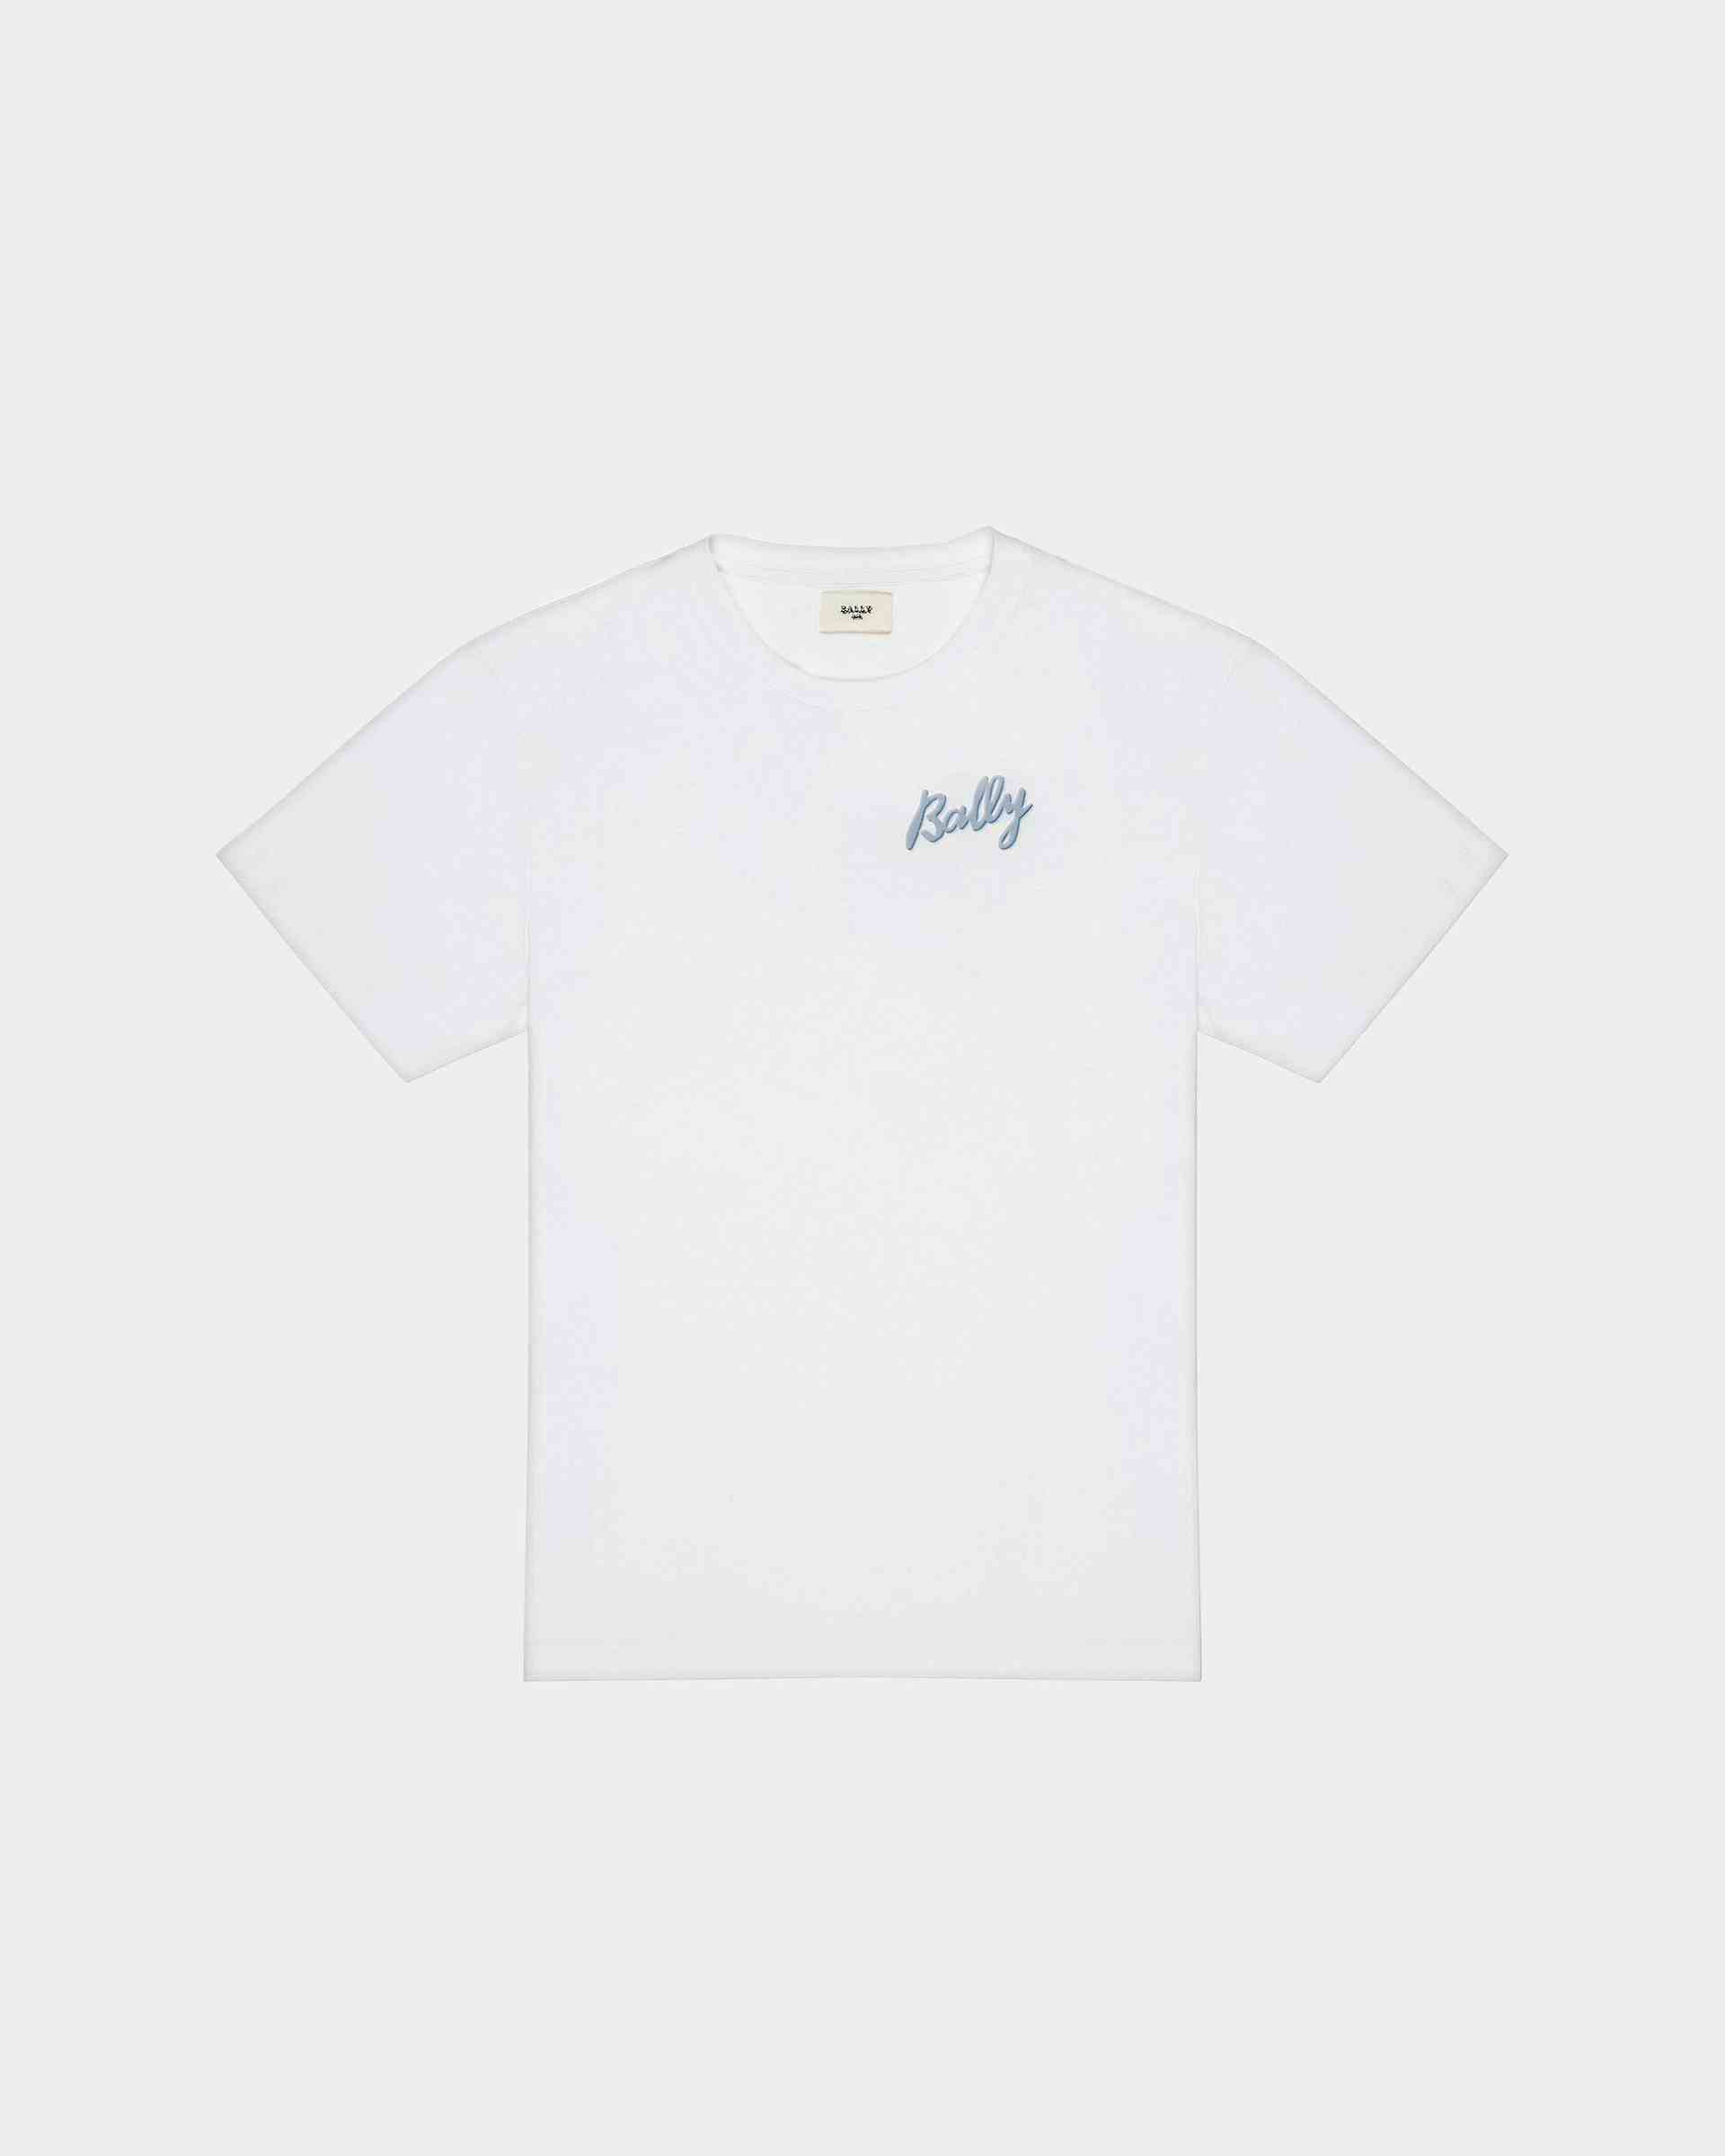 Cotton T-Shirt In White And Light Blue - Men's - Bally